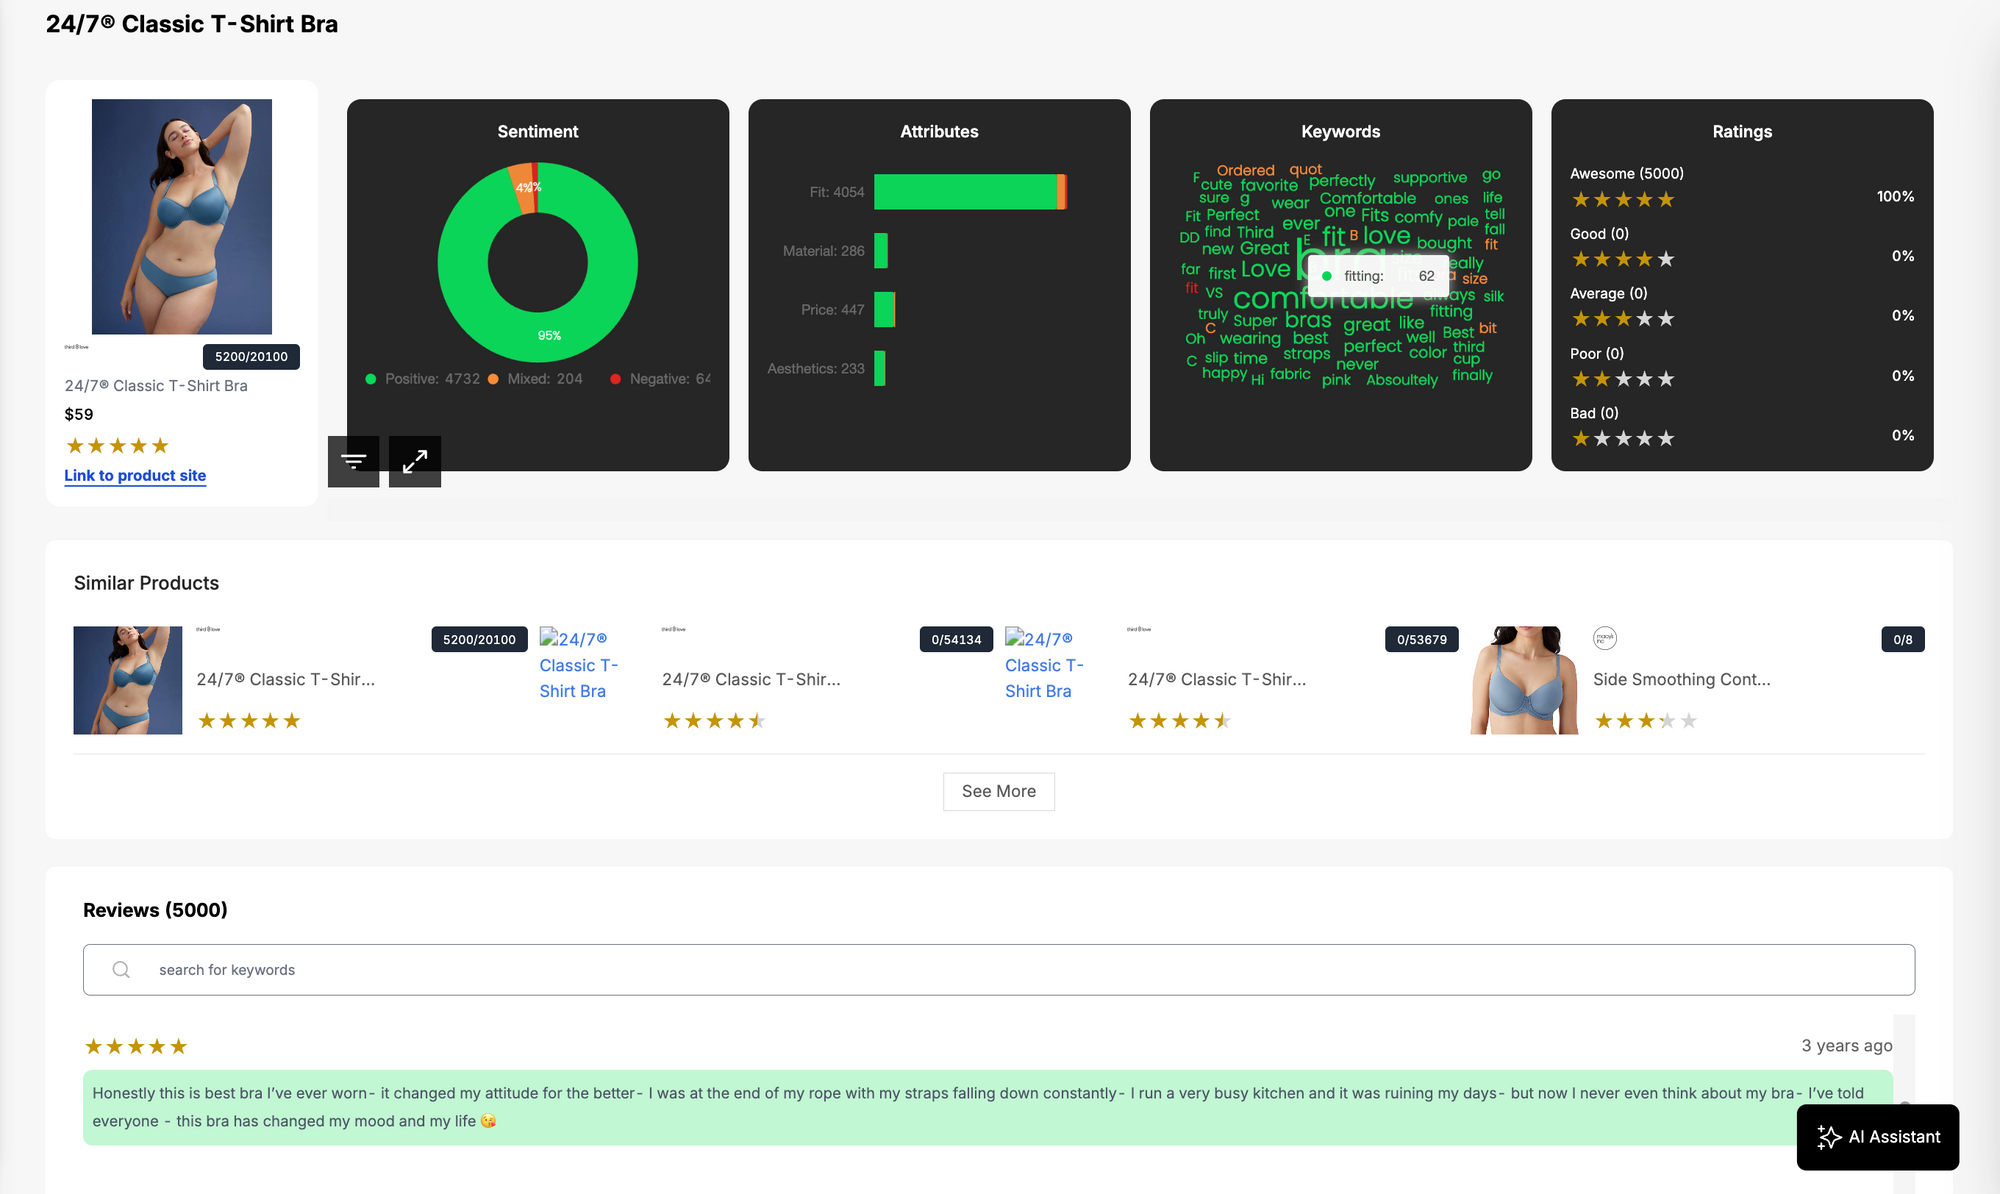 Woven Insights dashboard, showing insights into the fitting of a bra, based on AI-powered analysis of customer reviews about the bra.